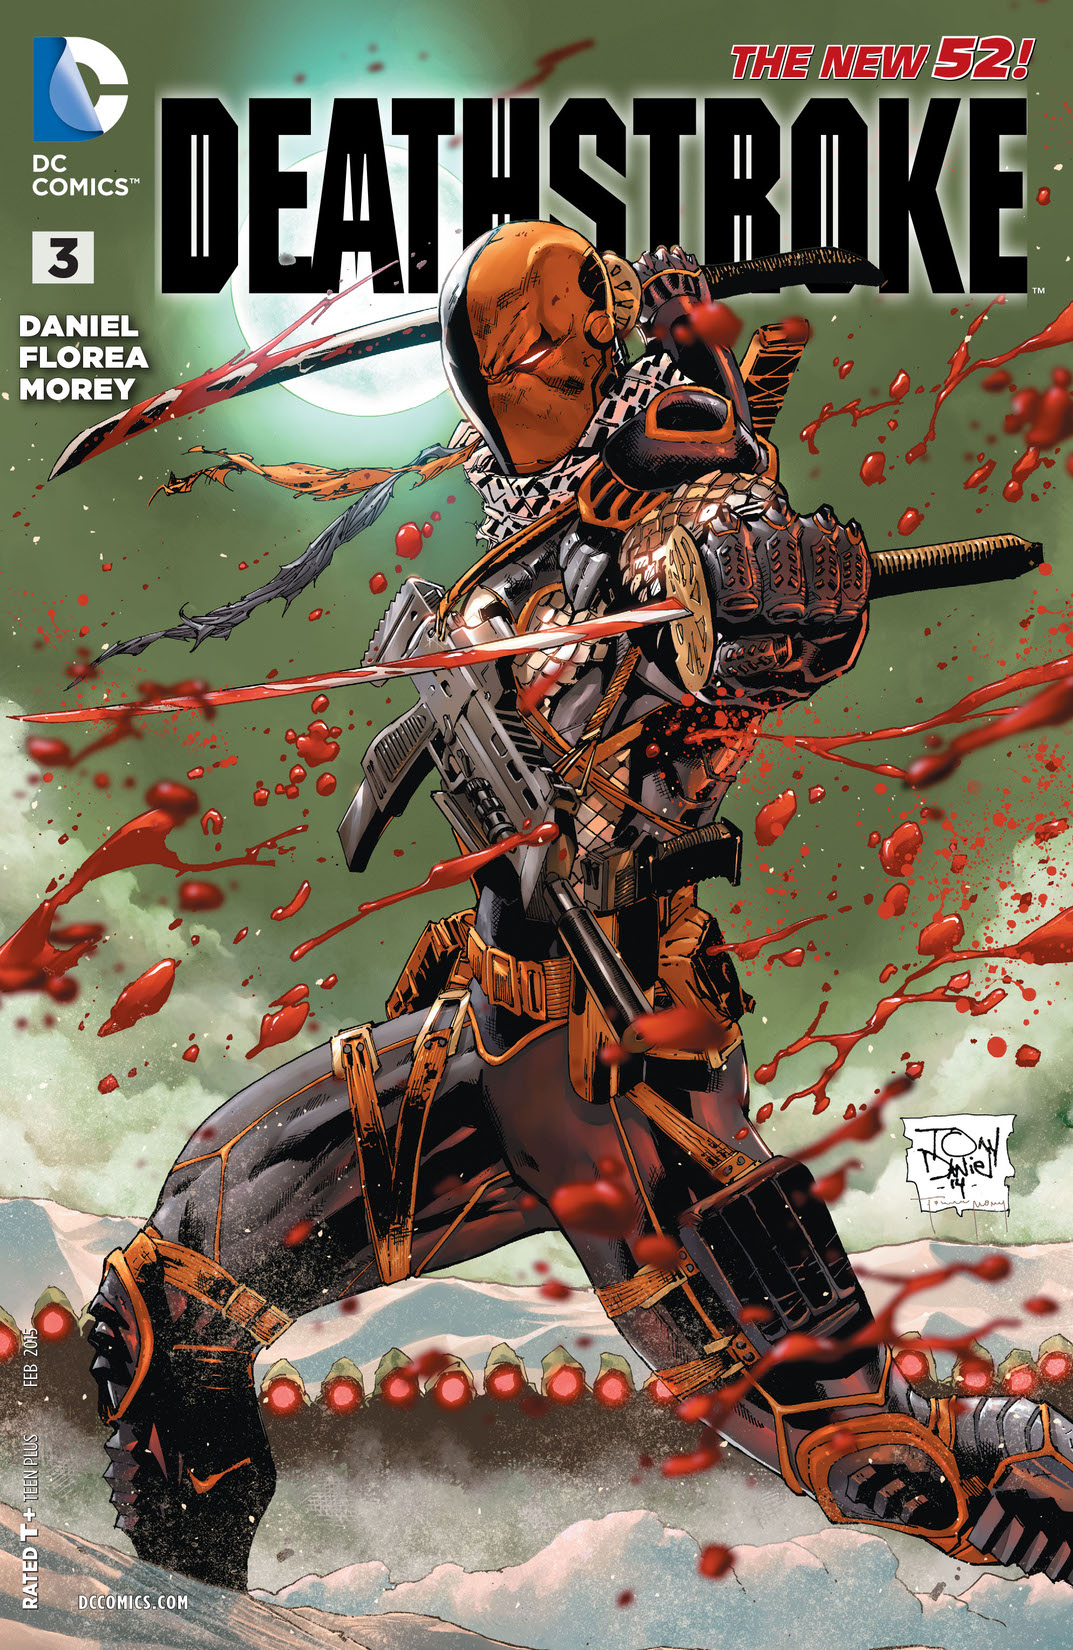 Deathstroke (2014-) #3 preview images